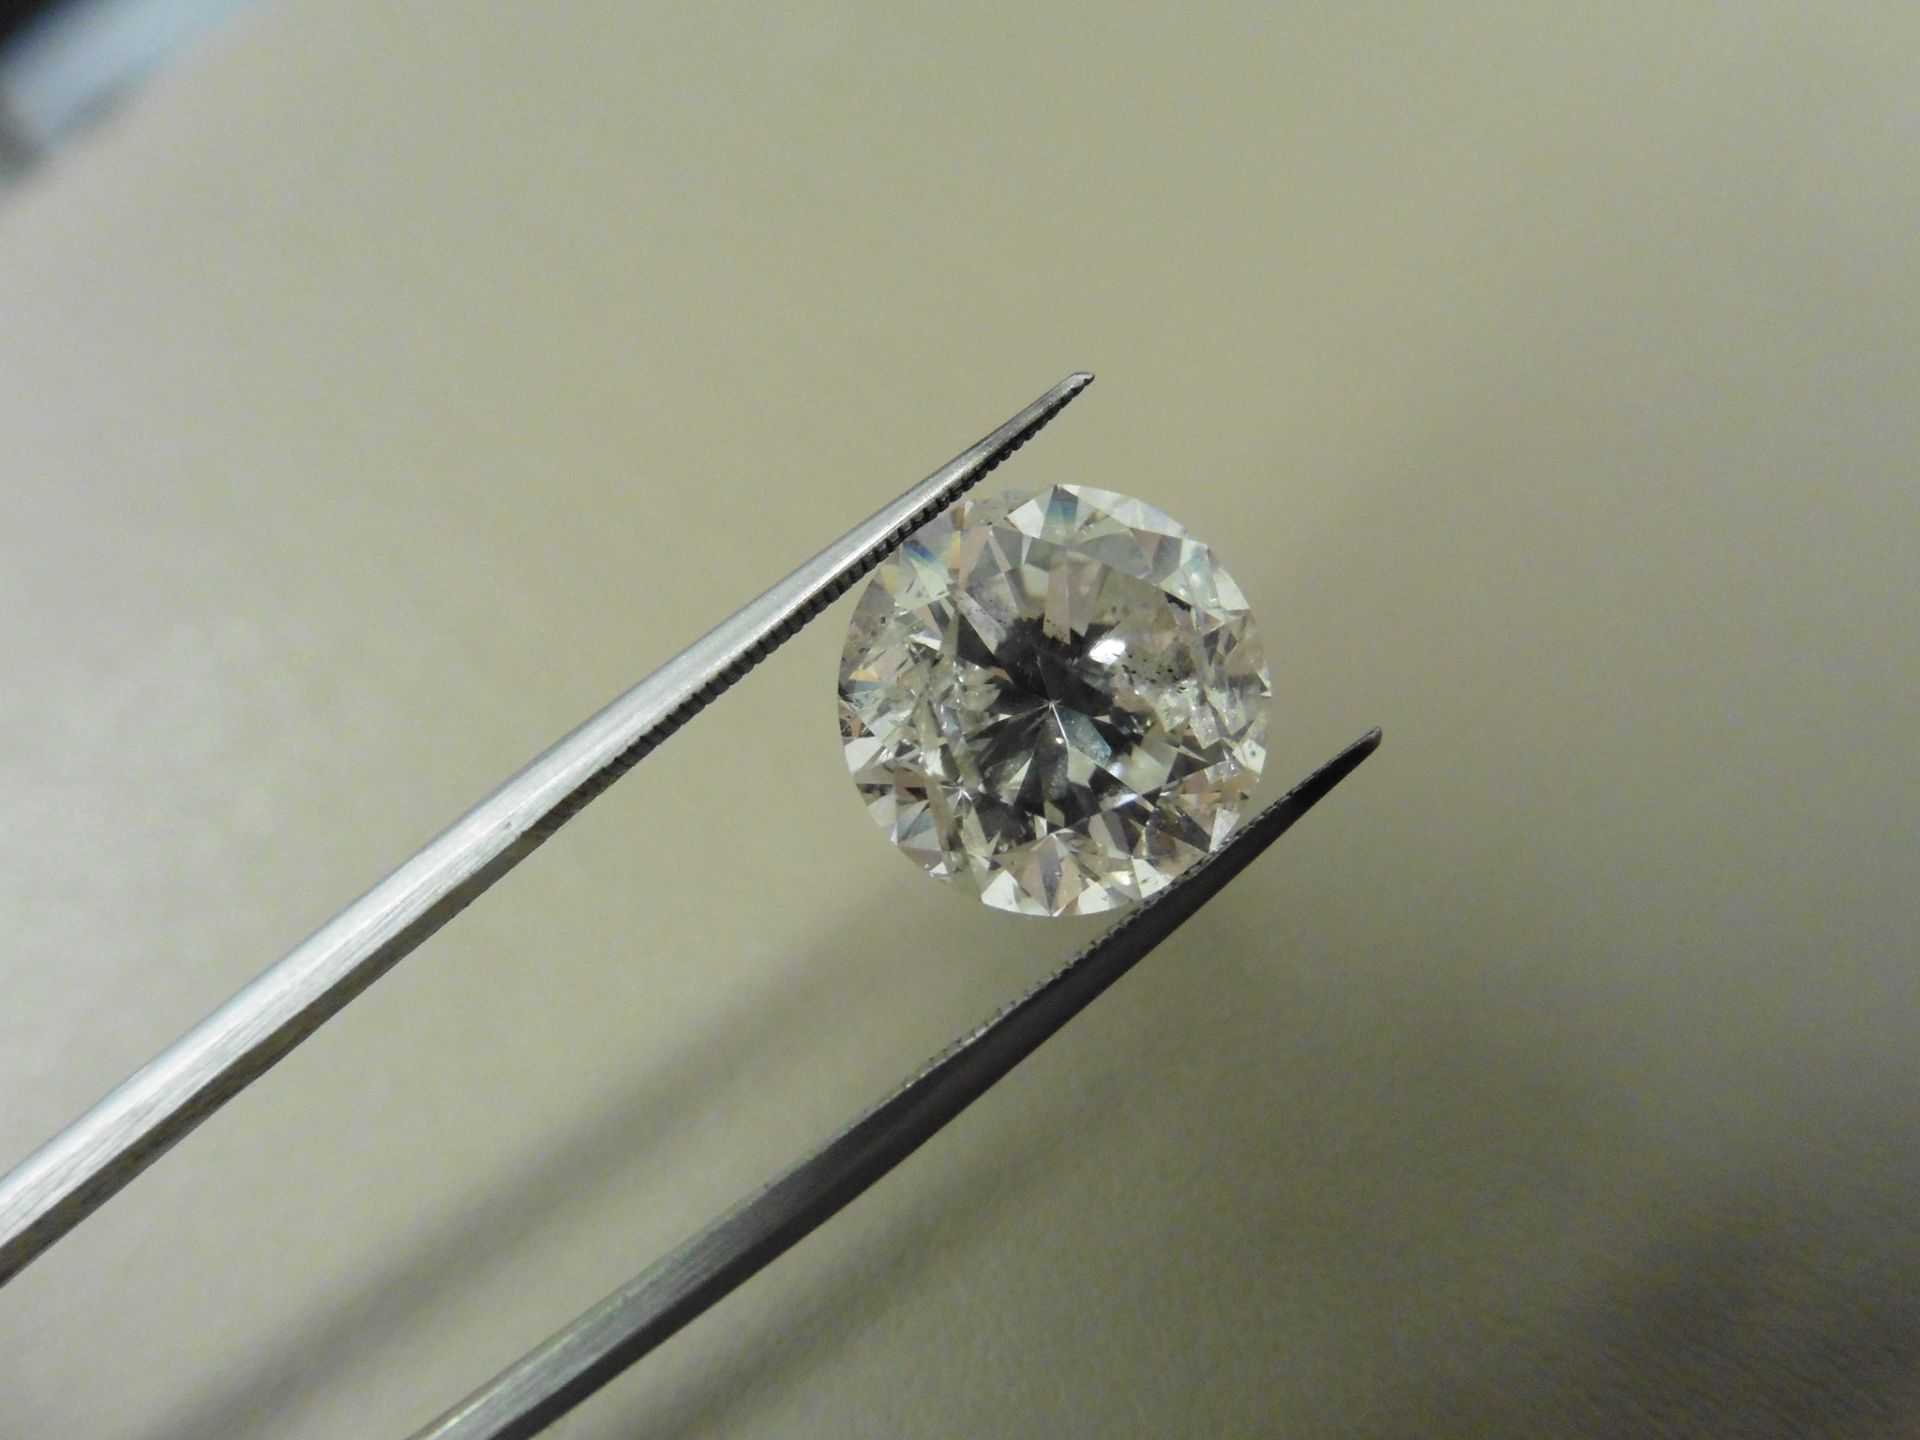 5.04ct natural loose briliant cut diamond. F colour and Il clarity. EGL certification. Valued at £